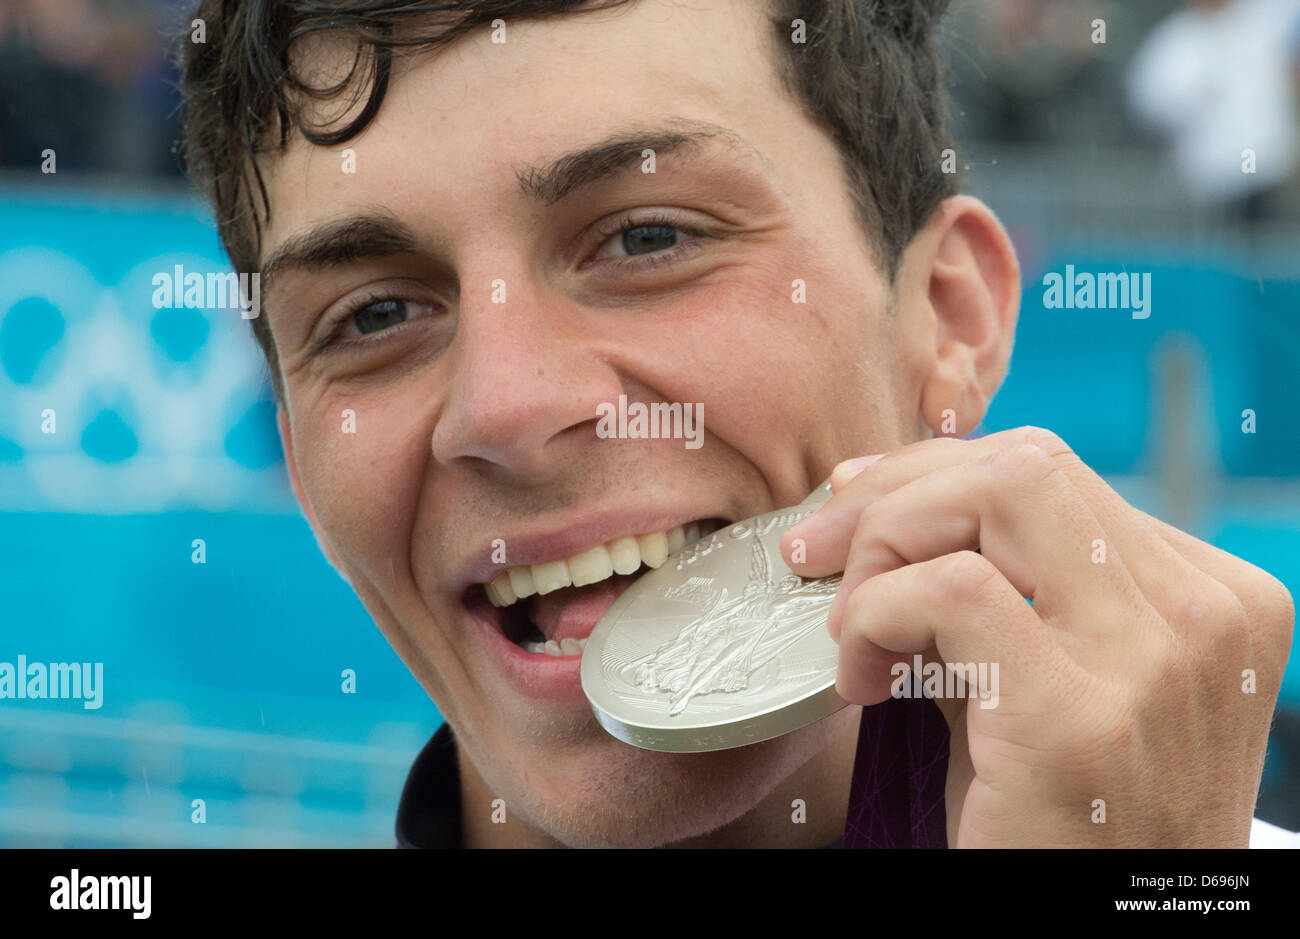 Germany's Sideris Tasiadis shows his silvermedal after the final race in the Canoe Slalom Men's Single competition at Lee Valley White Water Centre, during the London 2012 Olympic Games, London, Great Britain, 31 July 2012. Photo: Peter Kneffel dpa  +++(c) dpa - Bildfunk+++ Stock Photo